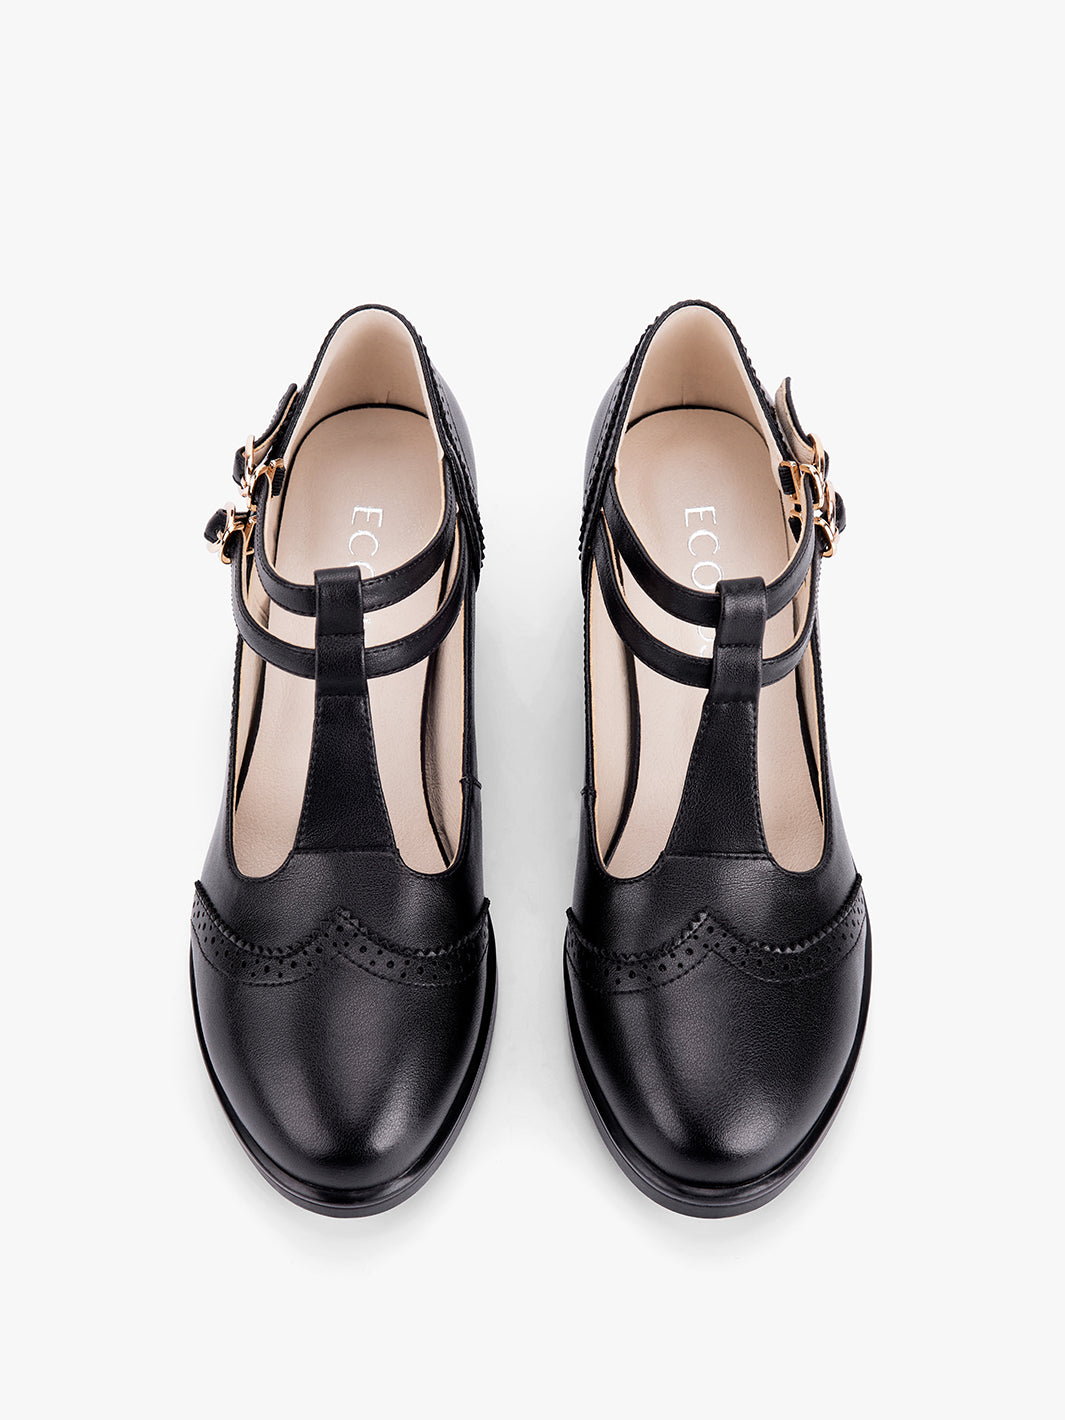 Ecosusi - Vintage Bow Leather Shoes, Women's Fashion, Footwear